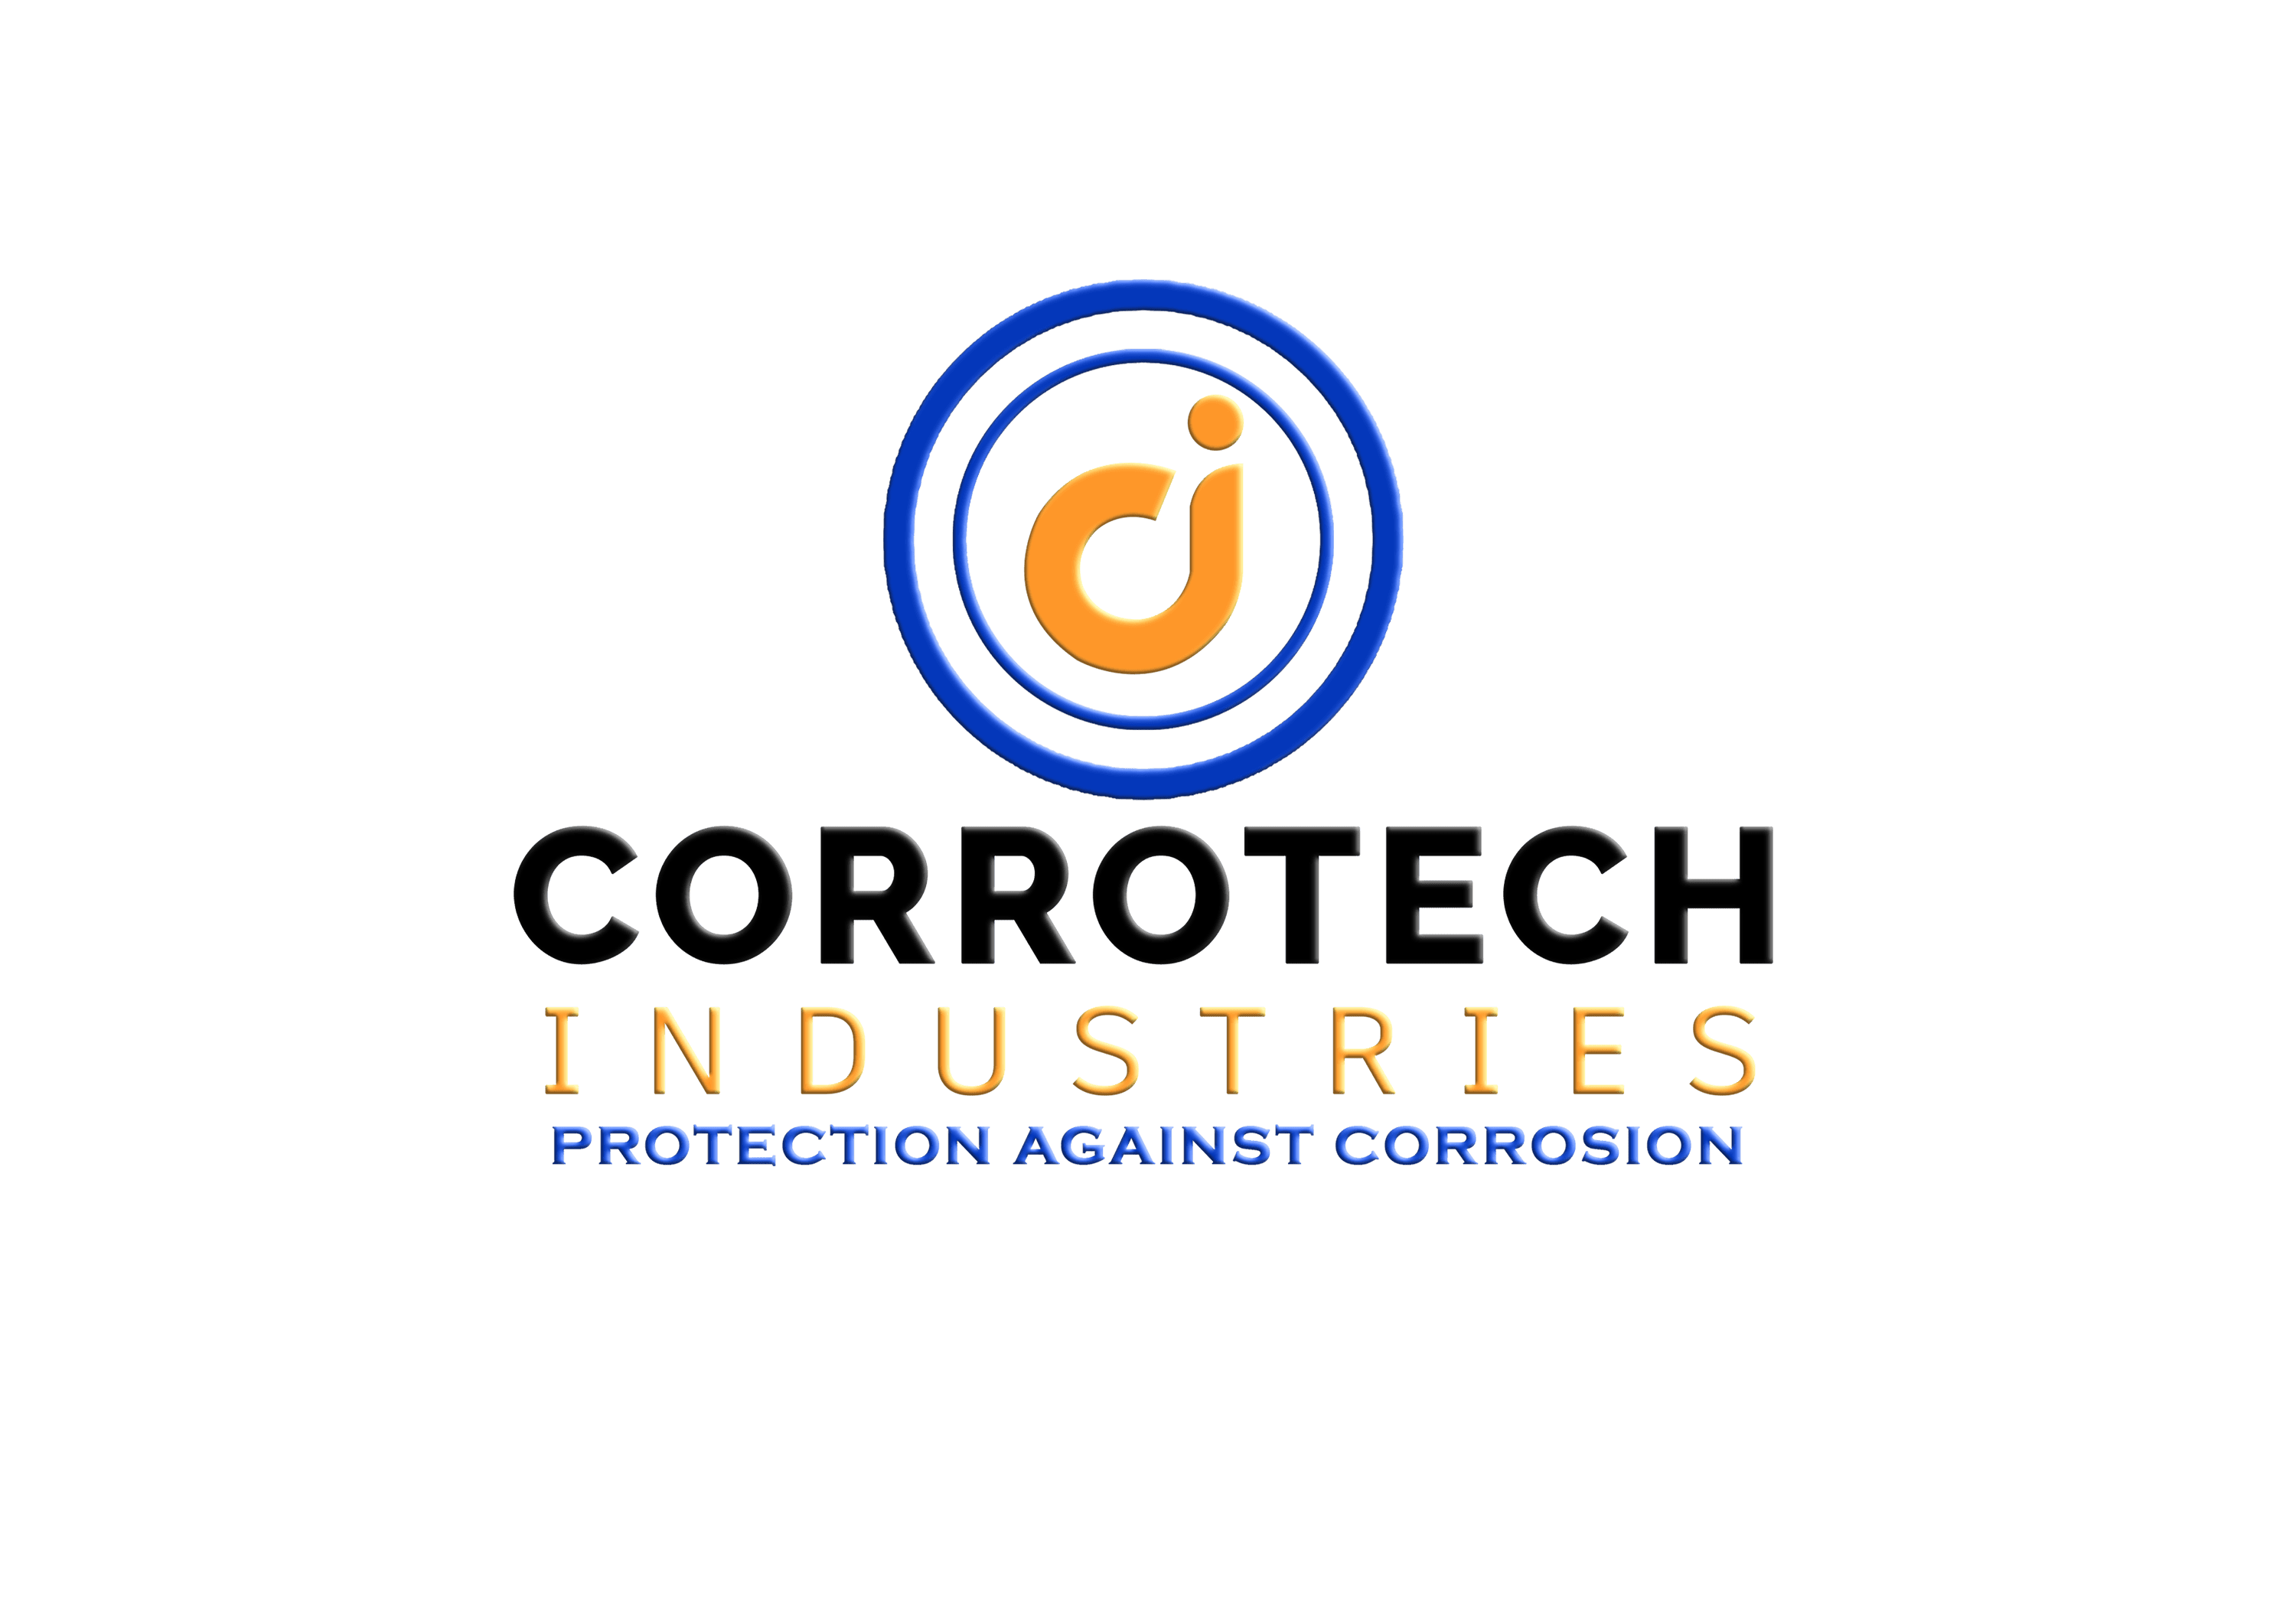 CORROTECH INDUSTRIES